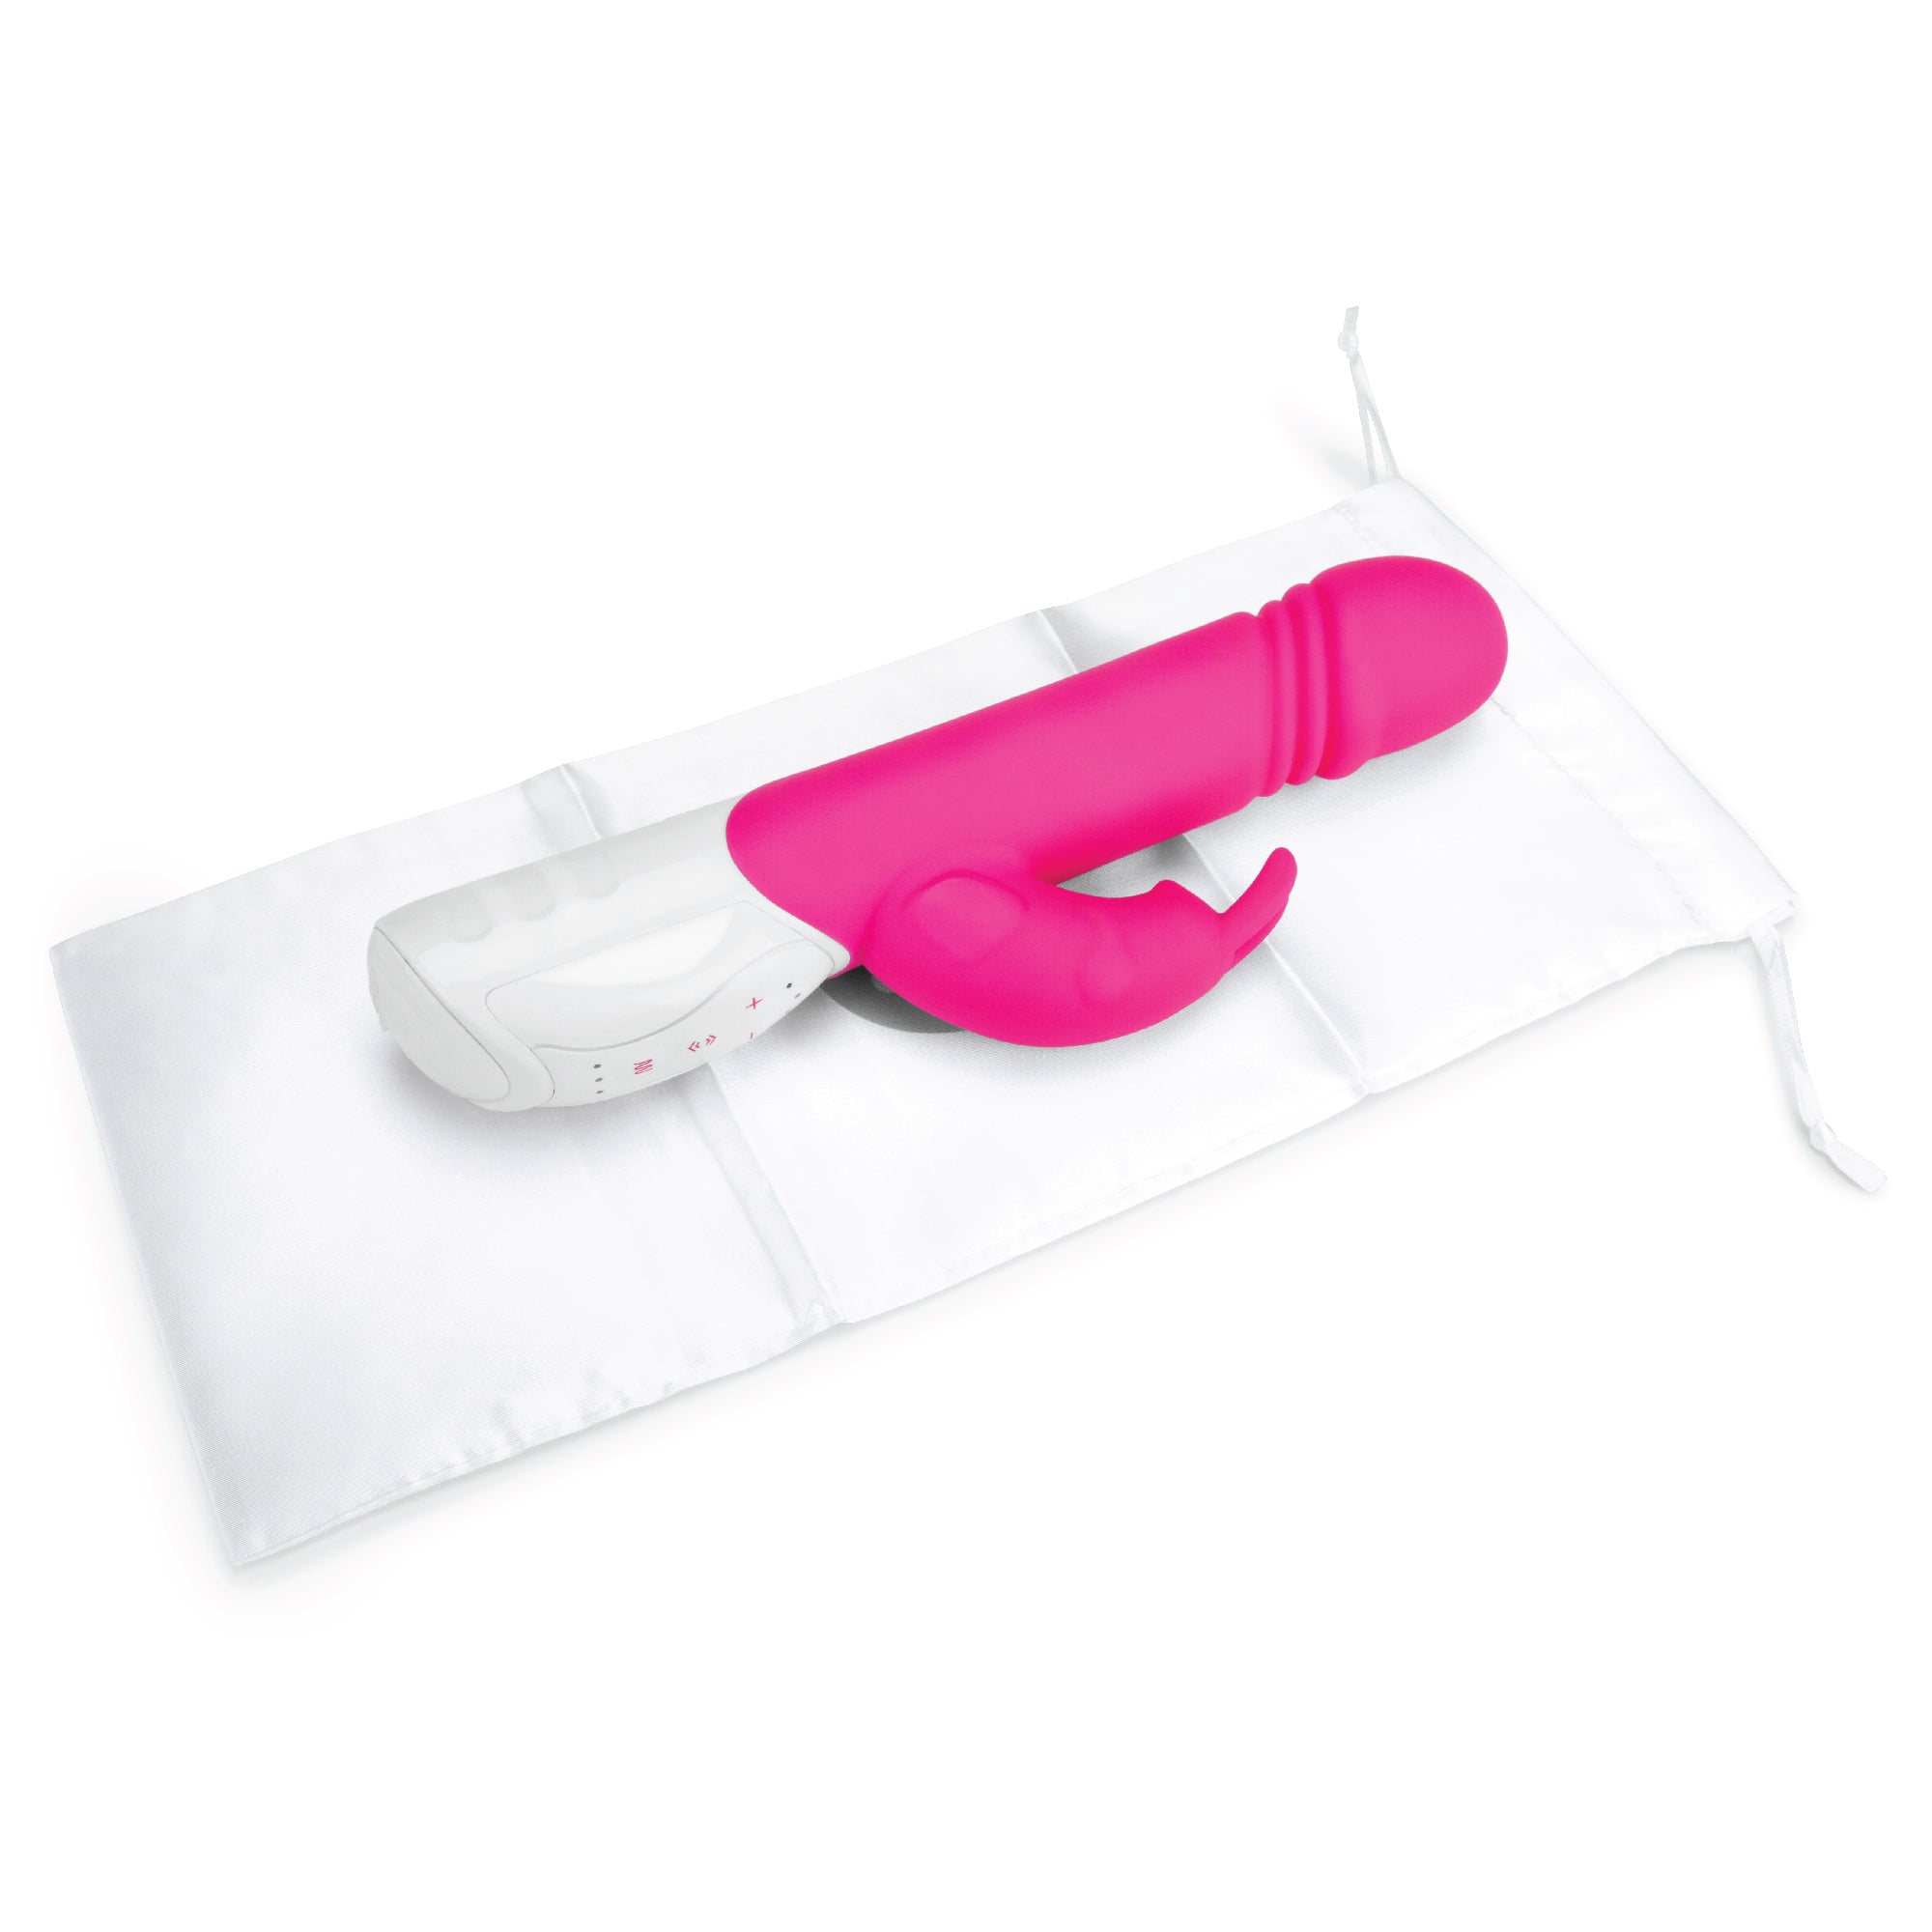 Rechargeable Thrusting Rabbit Vibrator - Hot Pink